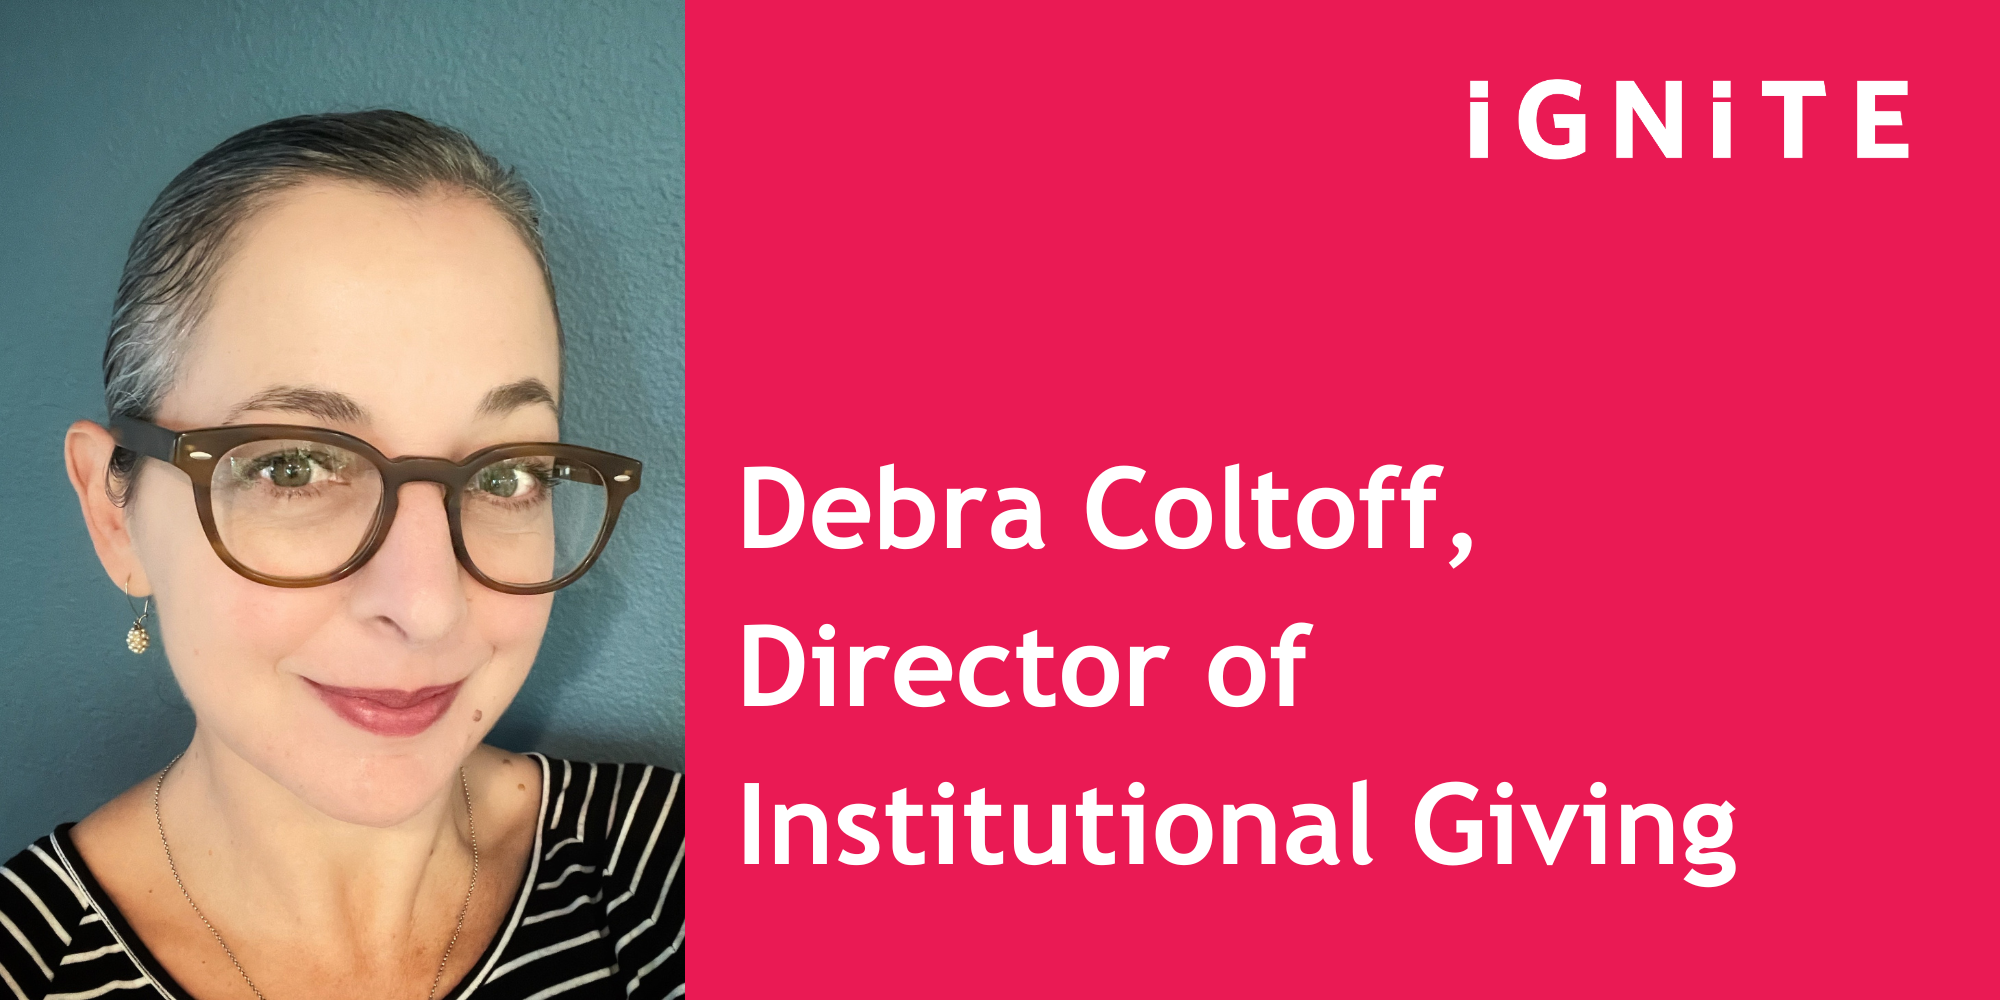 Debra Coltoff, Director of Institutional Giving